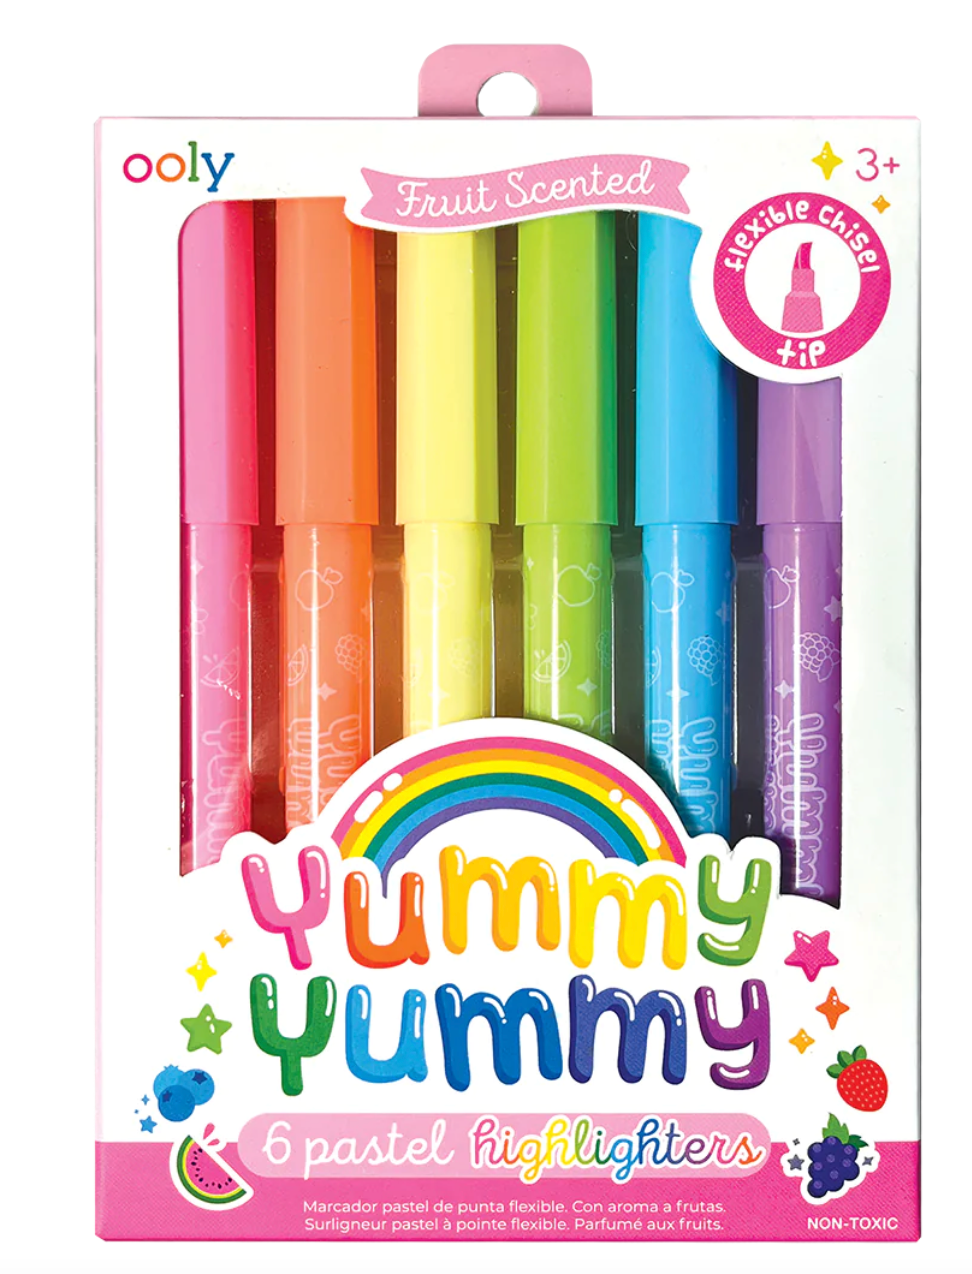 Yummy Yummy Scented Highlighters